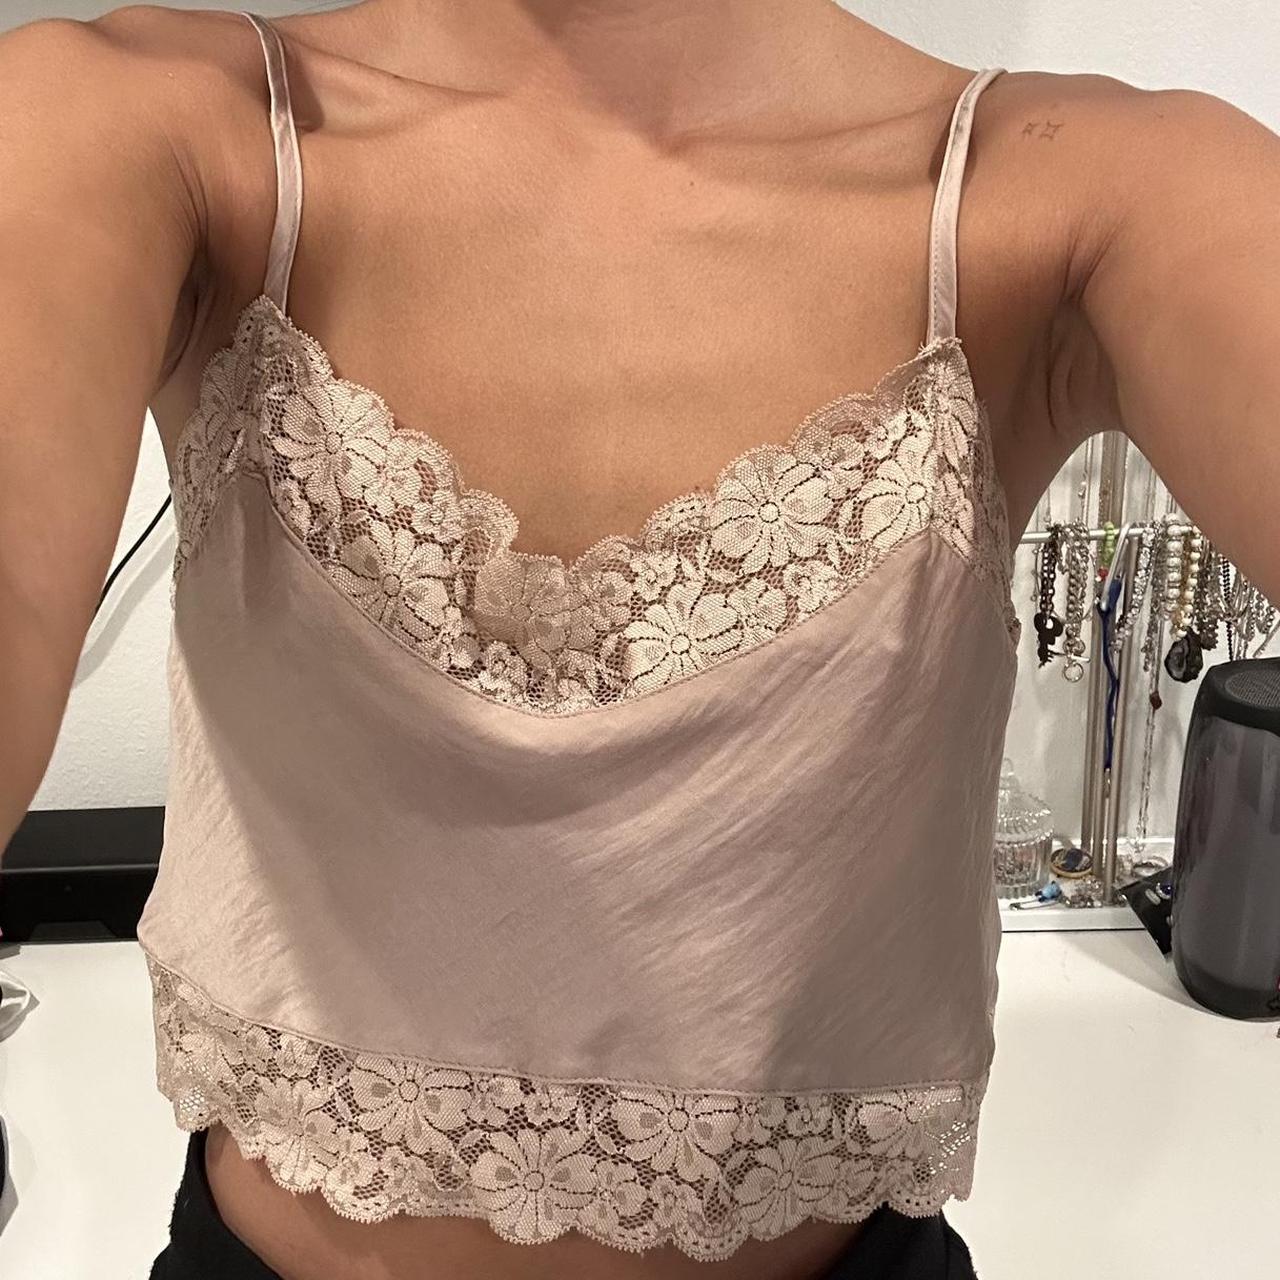 Brandy Melville tan Lace top!, Never worn, Excellent